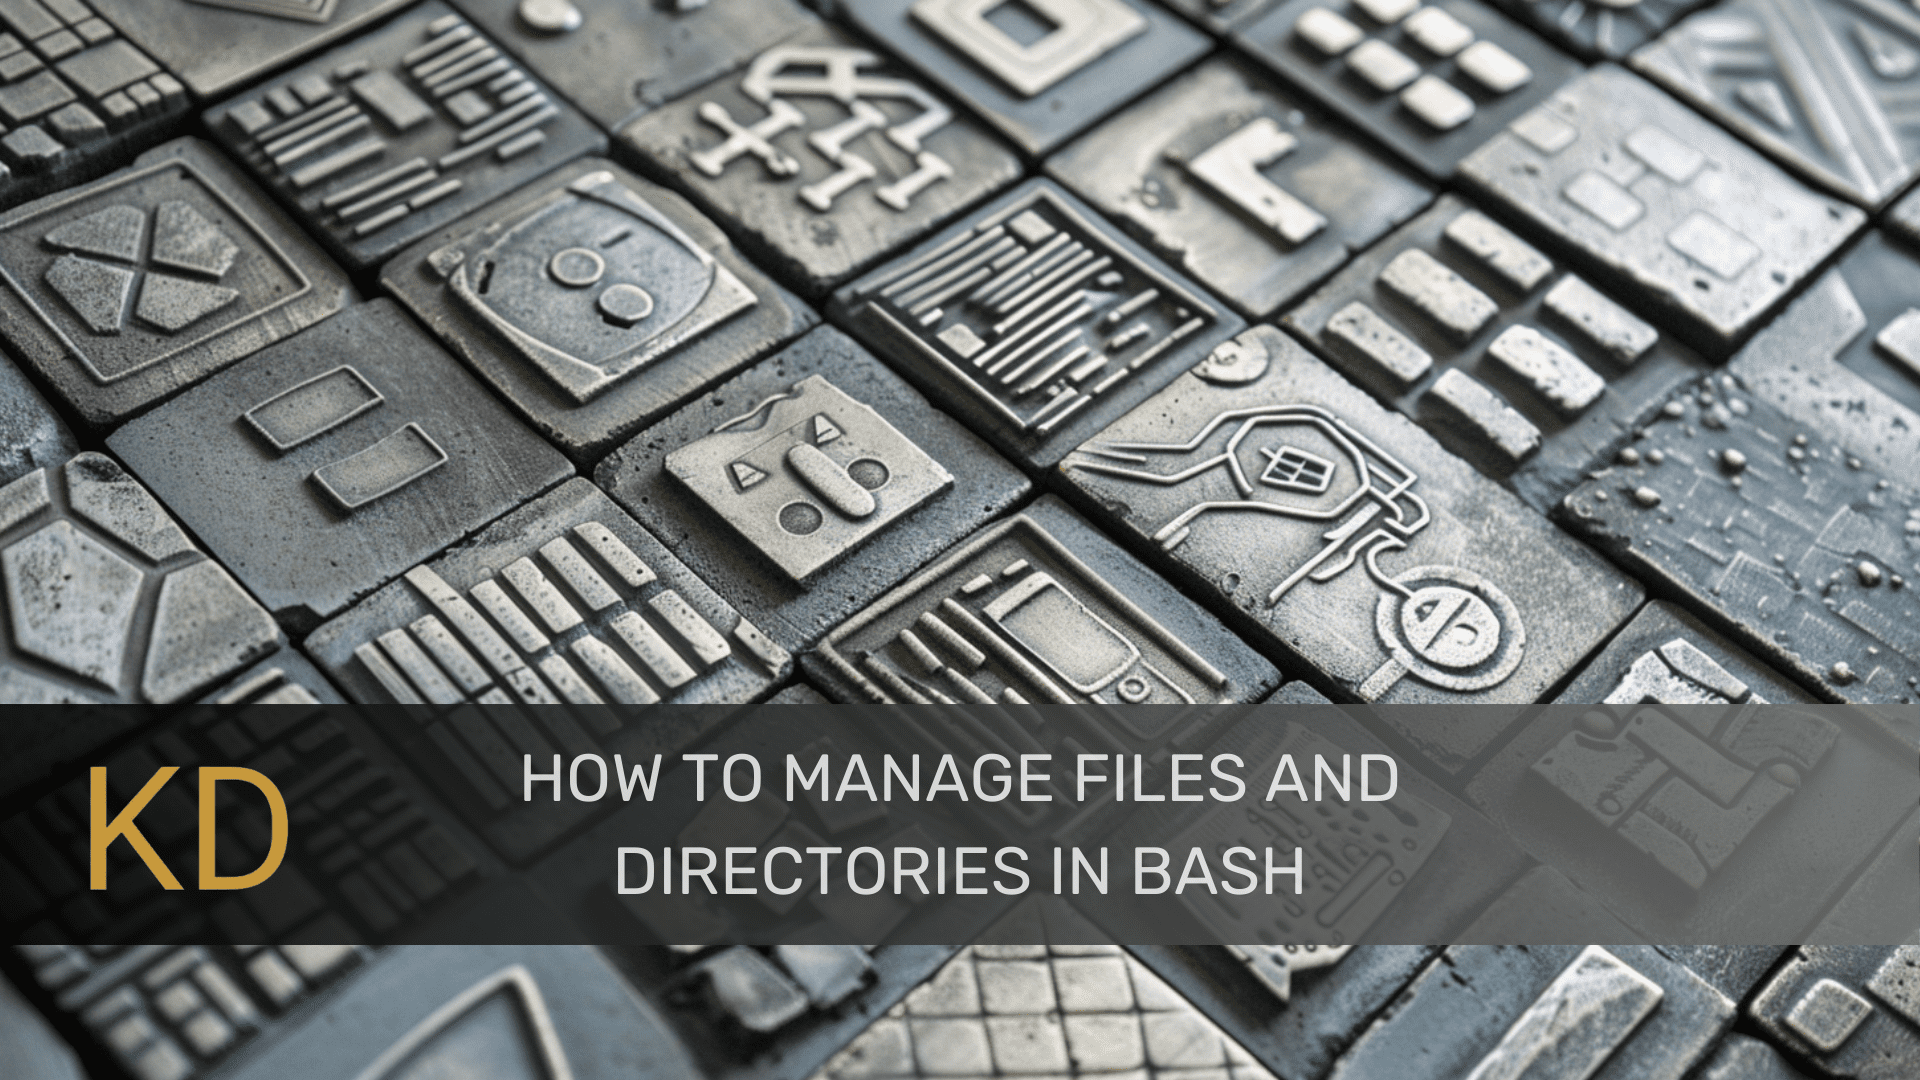 How to Manage Files and Directories in Bash